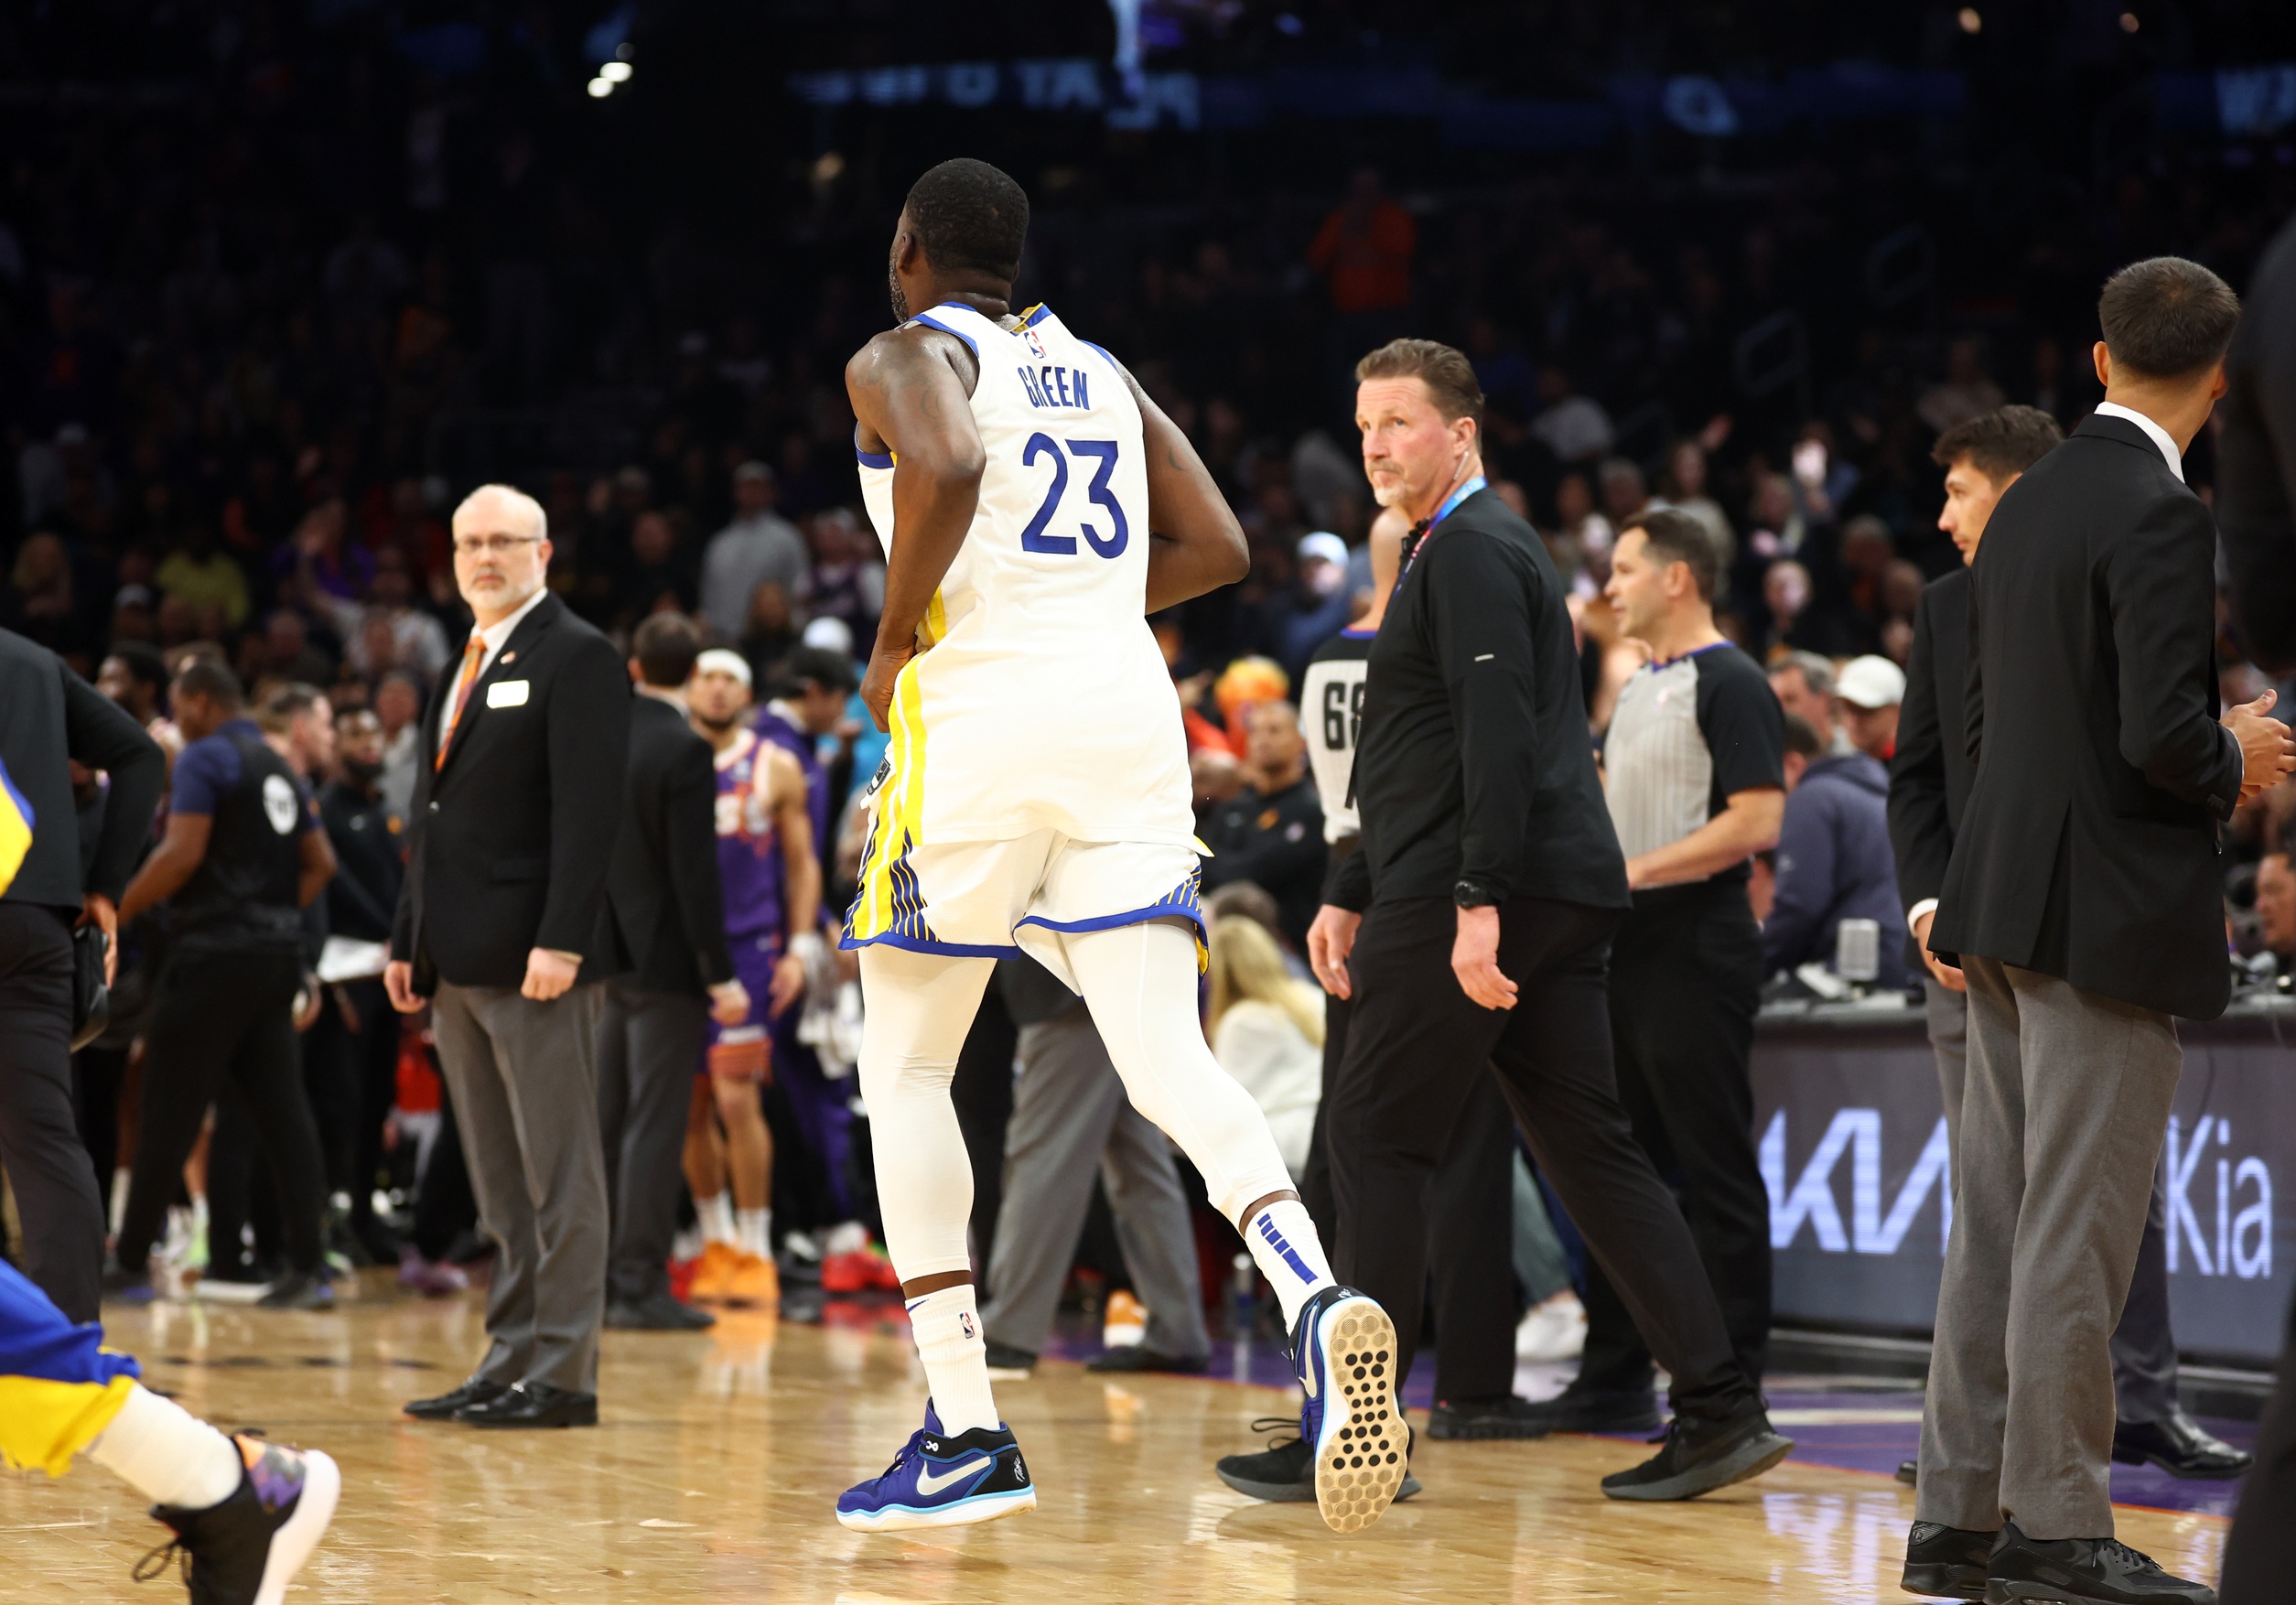 Draymond Green ejected after punching Jusuf Nurkic,